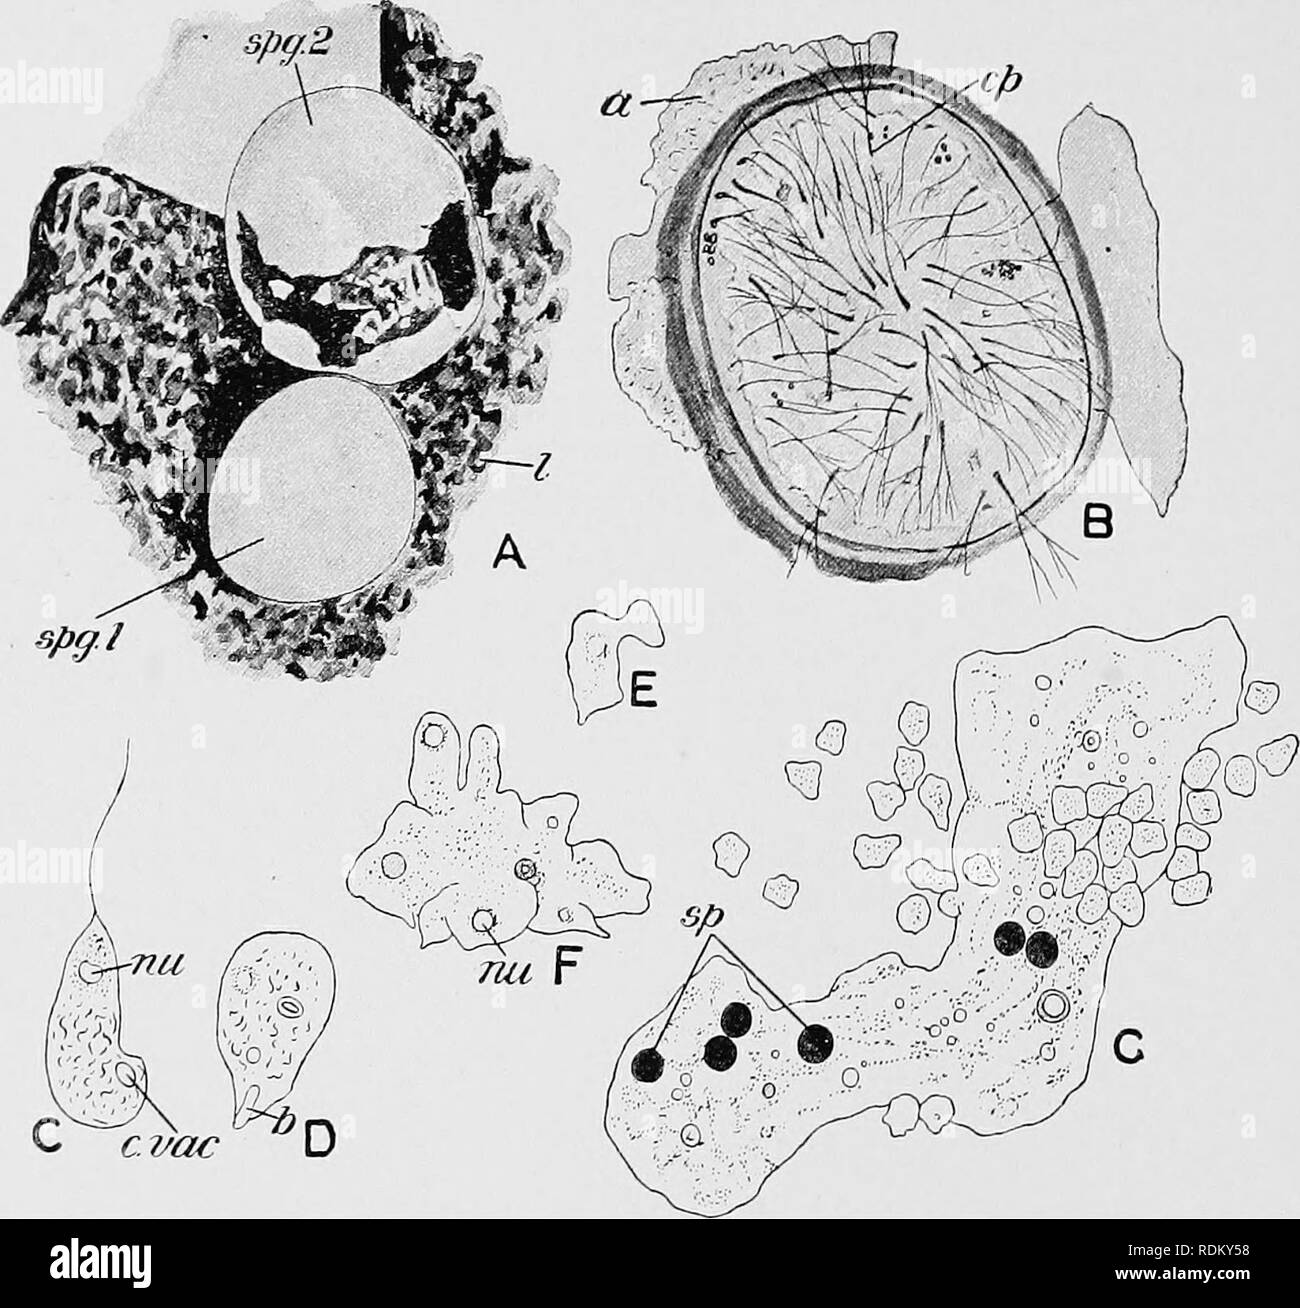 . The Cambridge natural history. Zoology. 92 PROTOZOA determine the rupture of the fruit-wall and the scattering of the spores. Again, in some cases the plasmodia themselves aggregate in the same way as the amoeboids do in the Acrasieae, and combine /• spff.2. cvac Fig. 30. —Didyniium dlffovme. A, two sporangia [spy 1 aad 2) on a fragment of leaf (^) ; B, section of sporangium, with ruptured outer layer (a), and threads of capillitium (cp); C, a flagellnla with contractile vacuole {cvac) aud nucleus (nu) ; D, tlie same after loss of flagellnni; b, an ingested bacillus ; E, an amoebula ; F, con Stock Photo